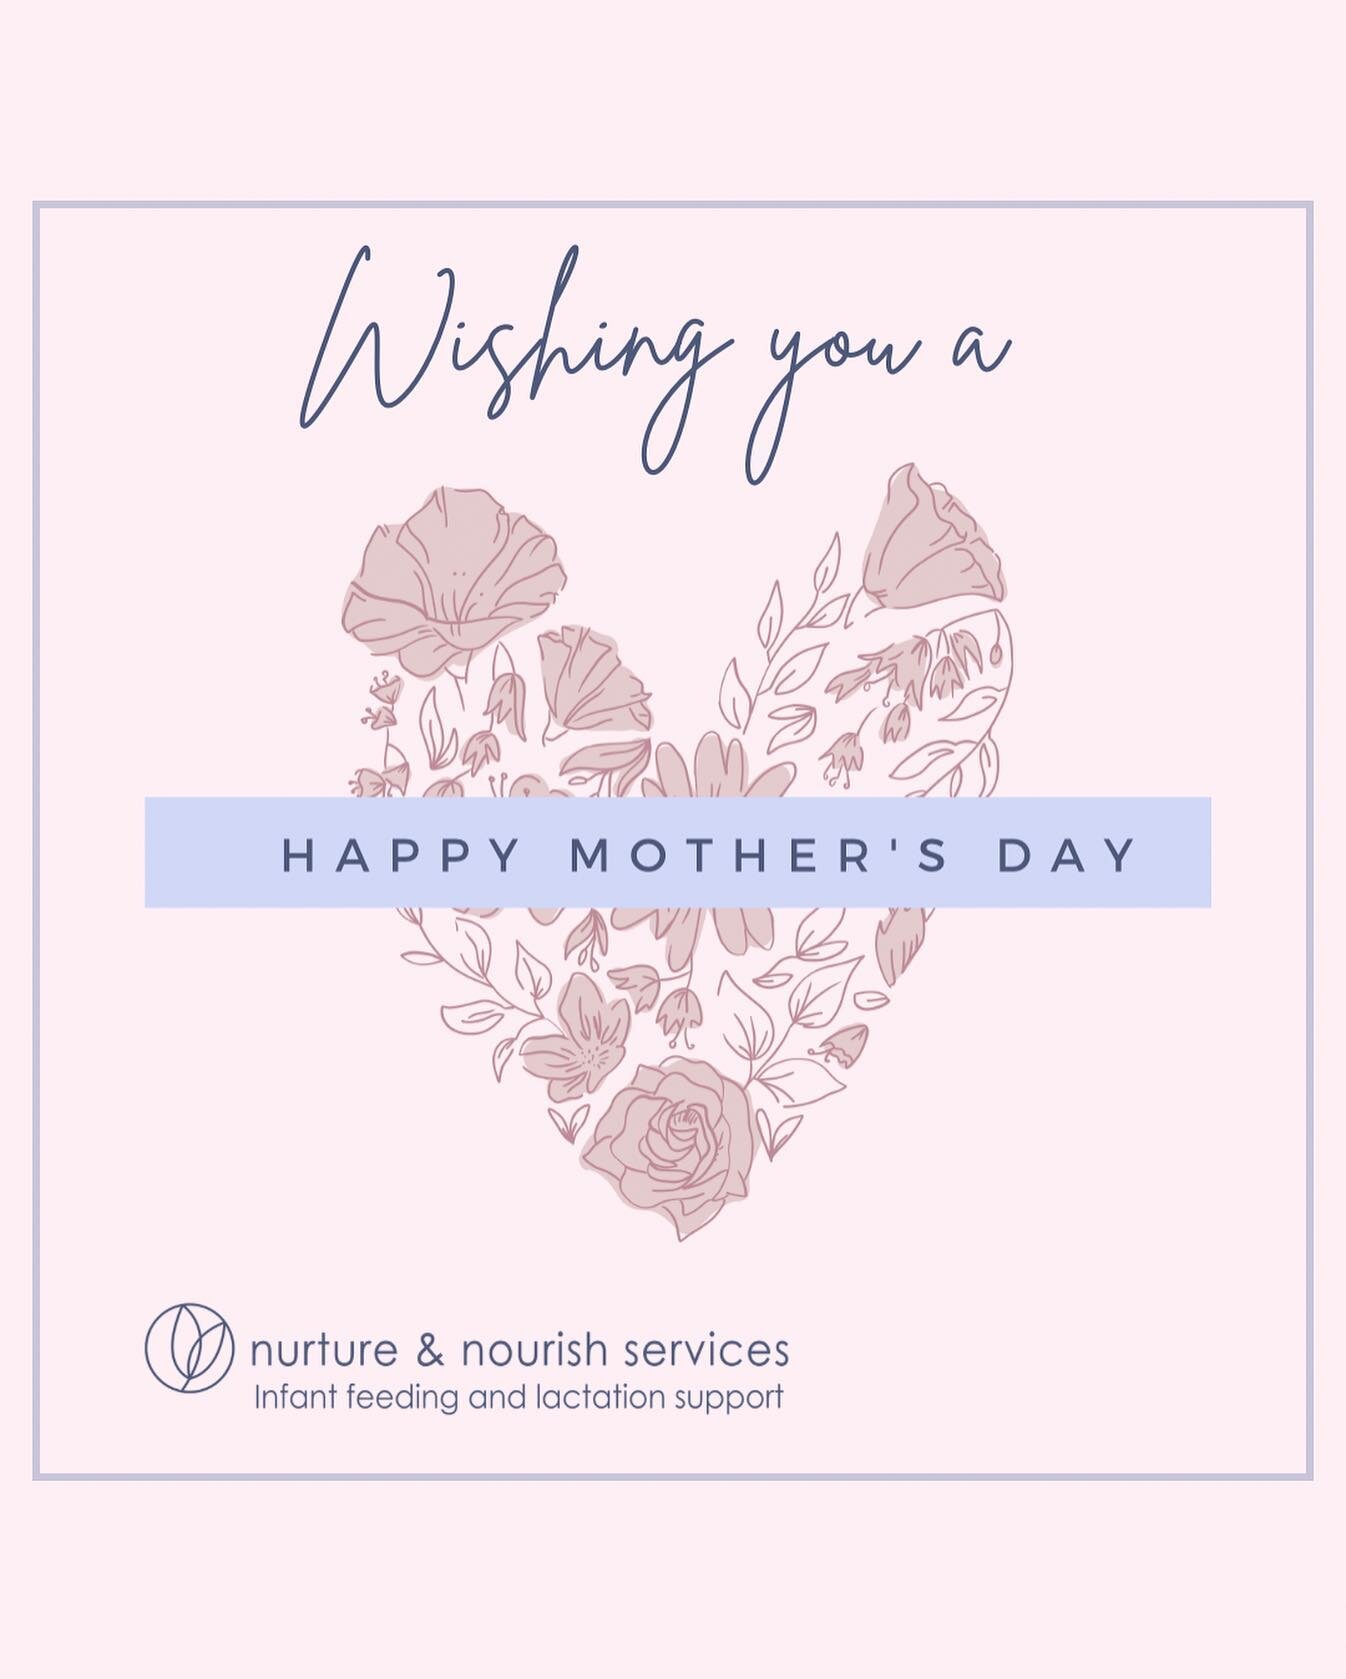 Happy Mother's Day to all the incredible moms out there! Whether you're a breastfeeding or bottle-feeding mom, today is a day to celebrate the amazing love and dedication you give to your little ones every day.

To all the moms out there, you are doi